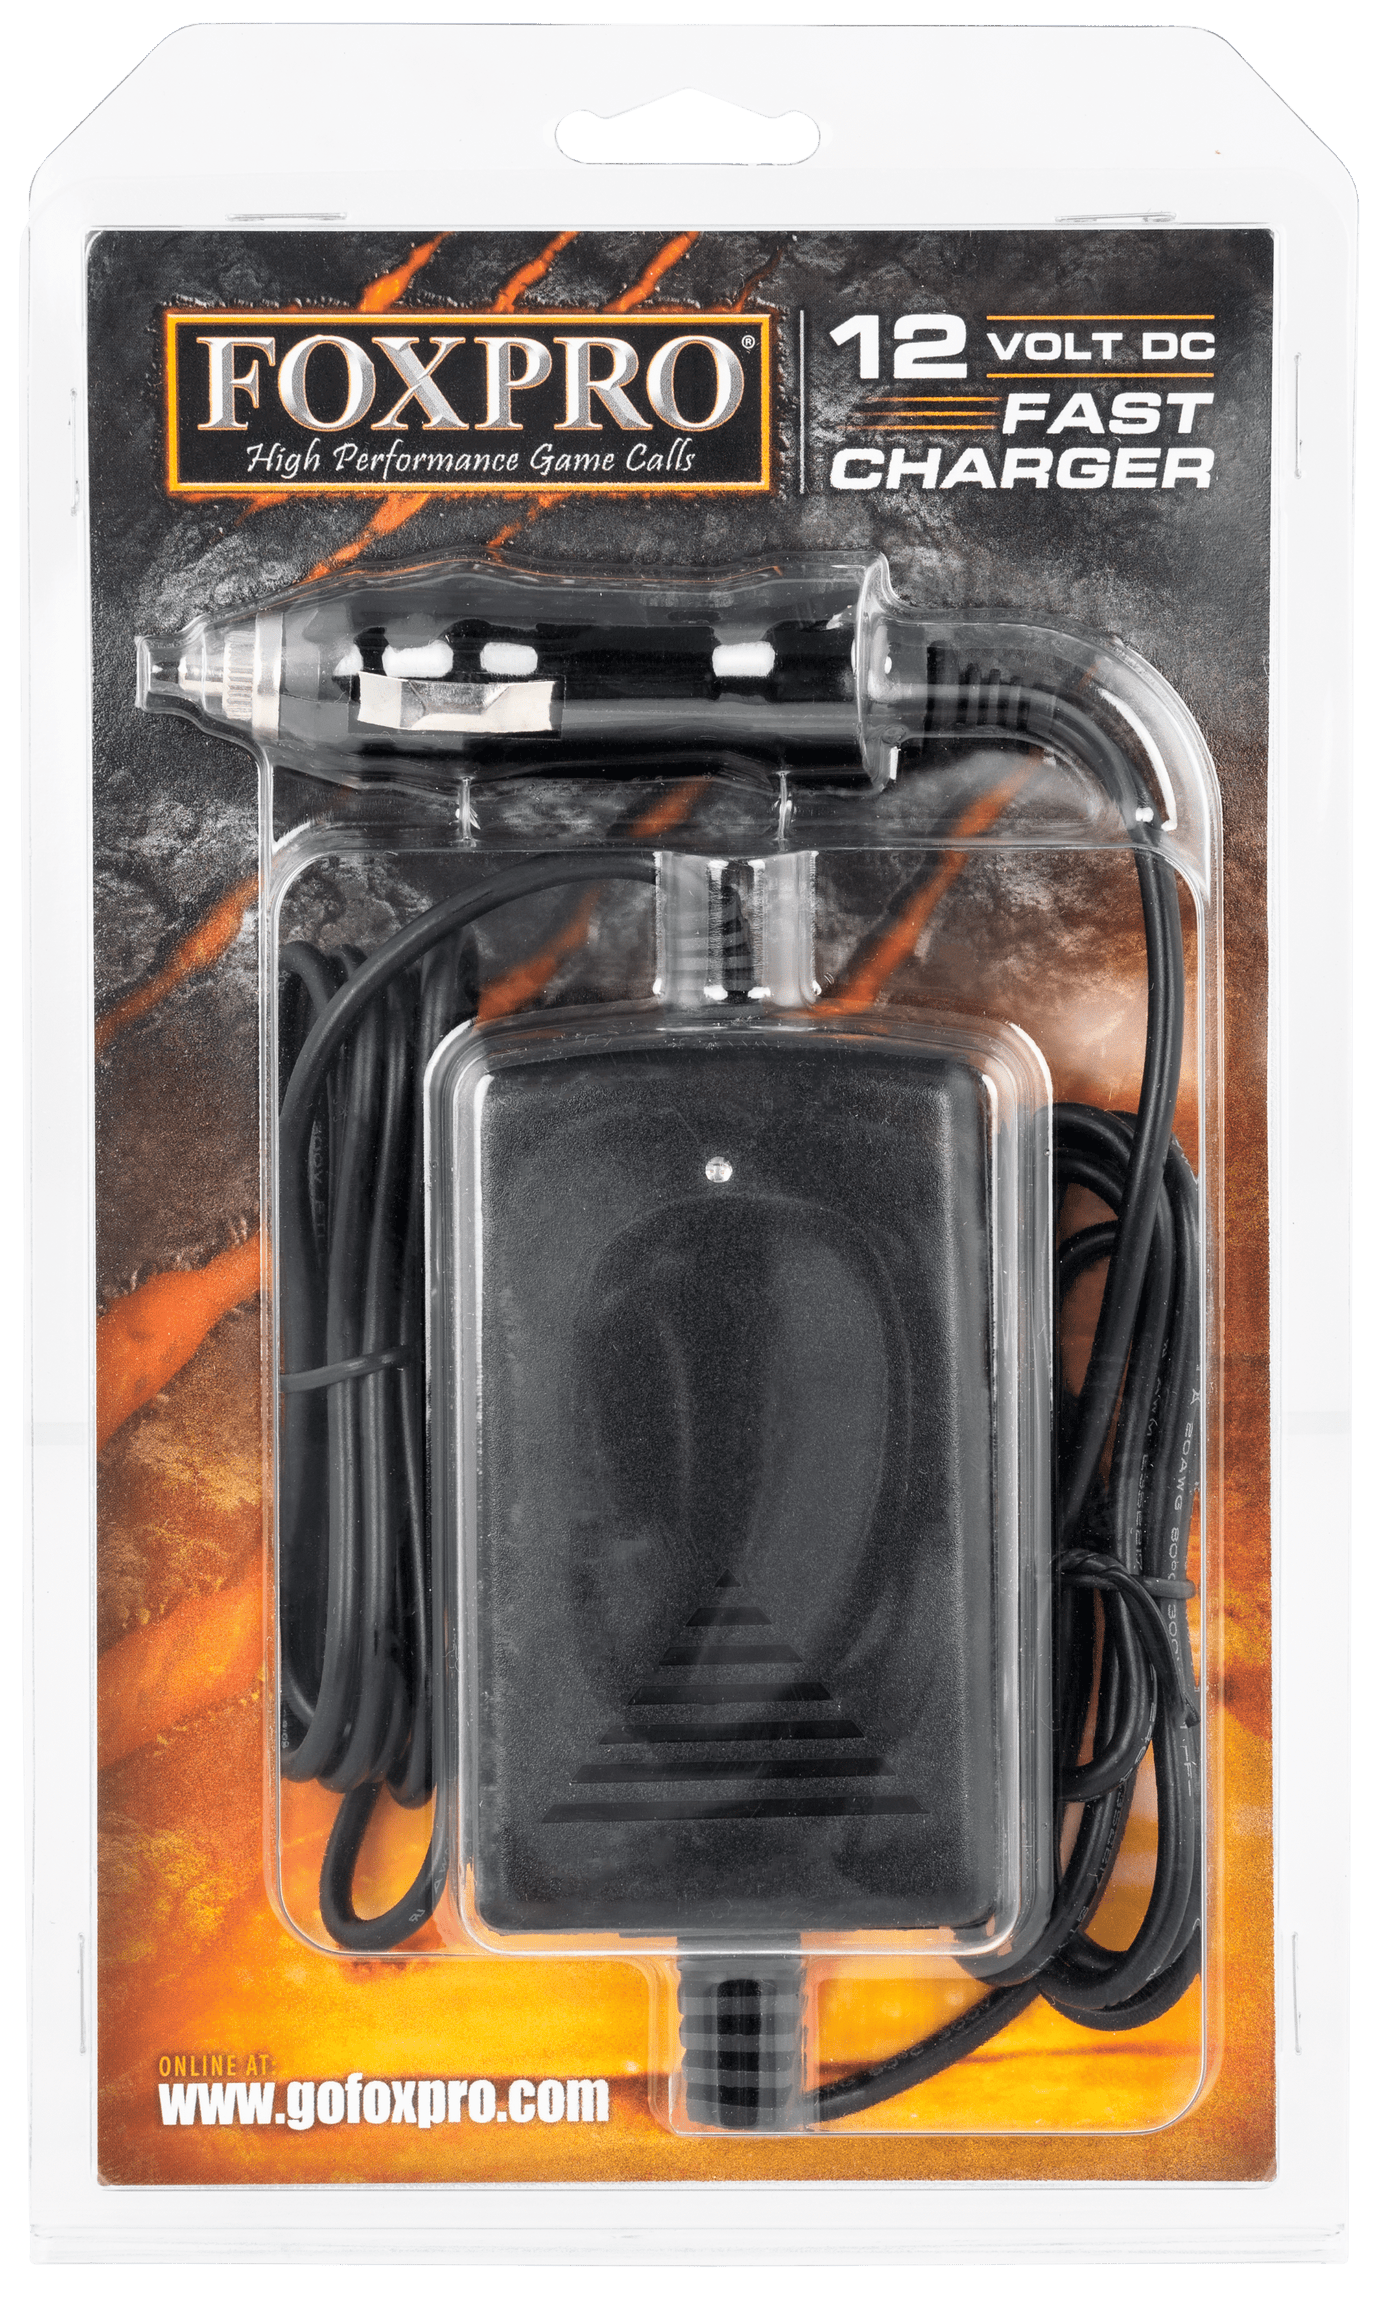 Foxpro Foxpro Fast Charger, Foxpro Chg-fast        Fast Charger Accessories